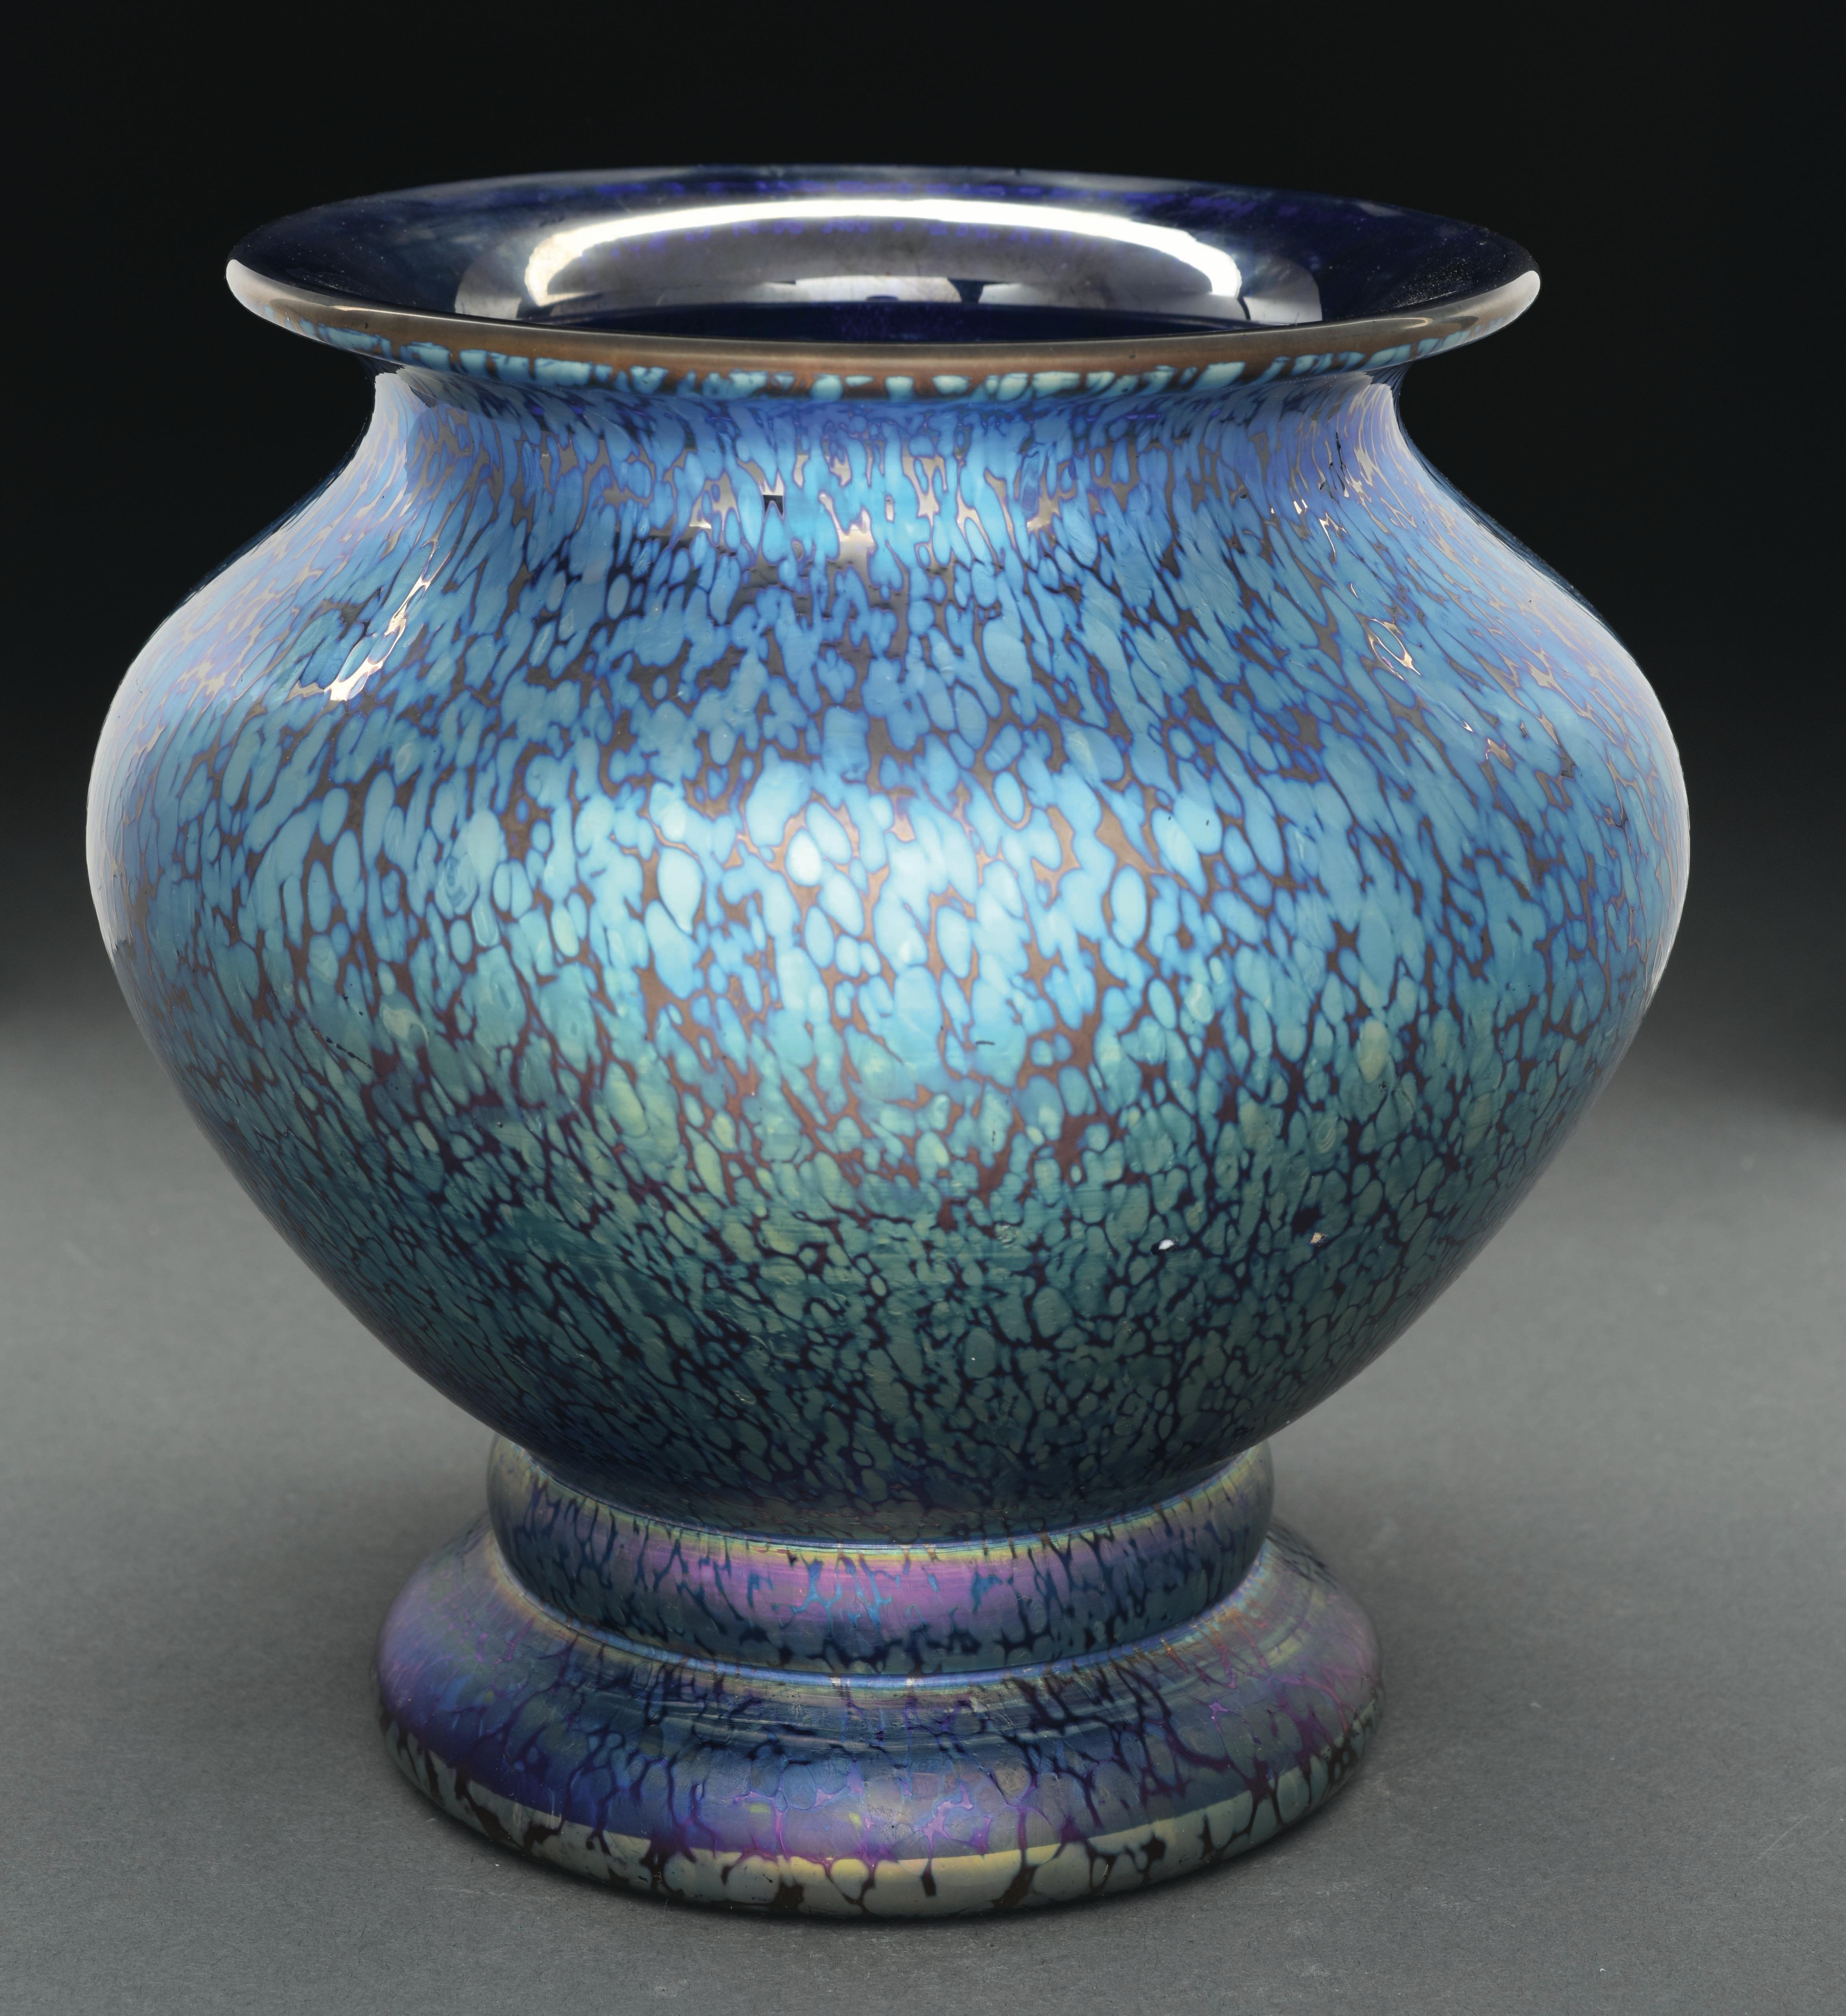 This Loetz vase in the Cobalt Papillon pattern has blue iridescent Papillon design covering the exterior of the vase. 

Vase is signed on the polished pontil 